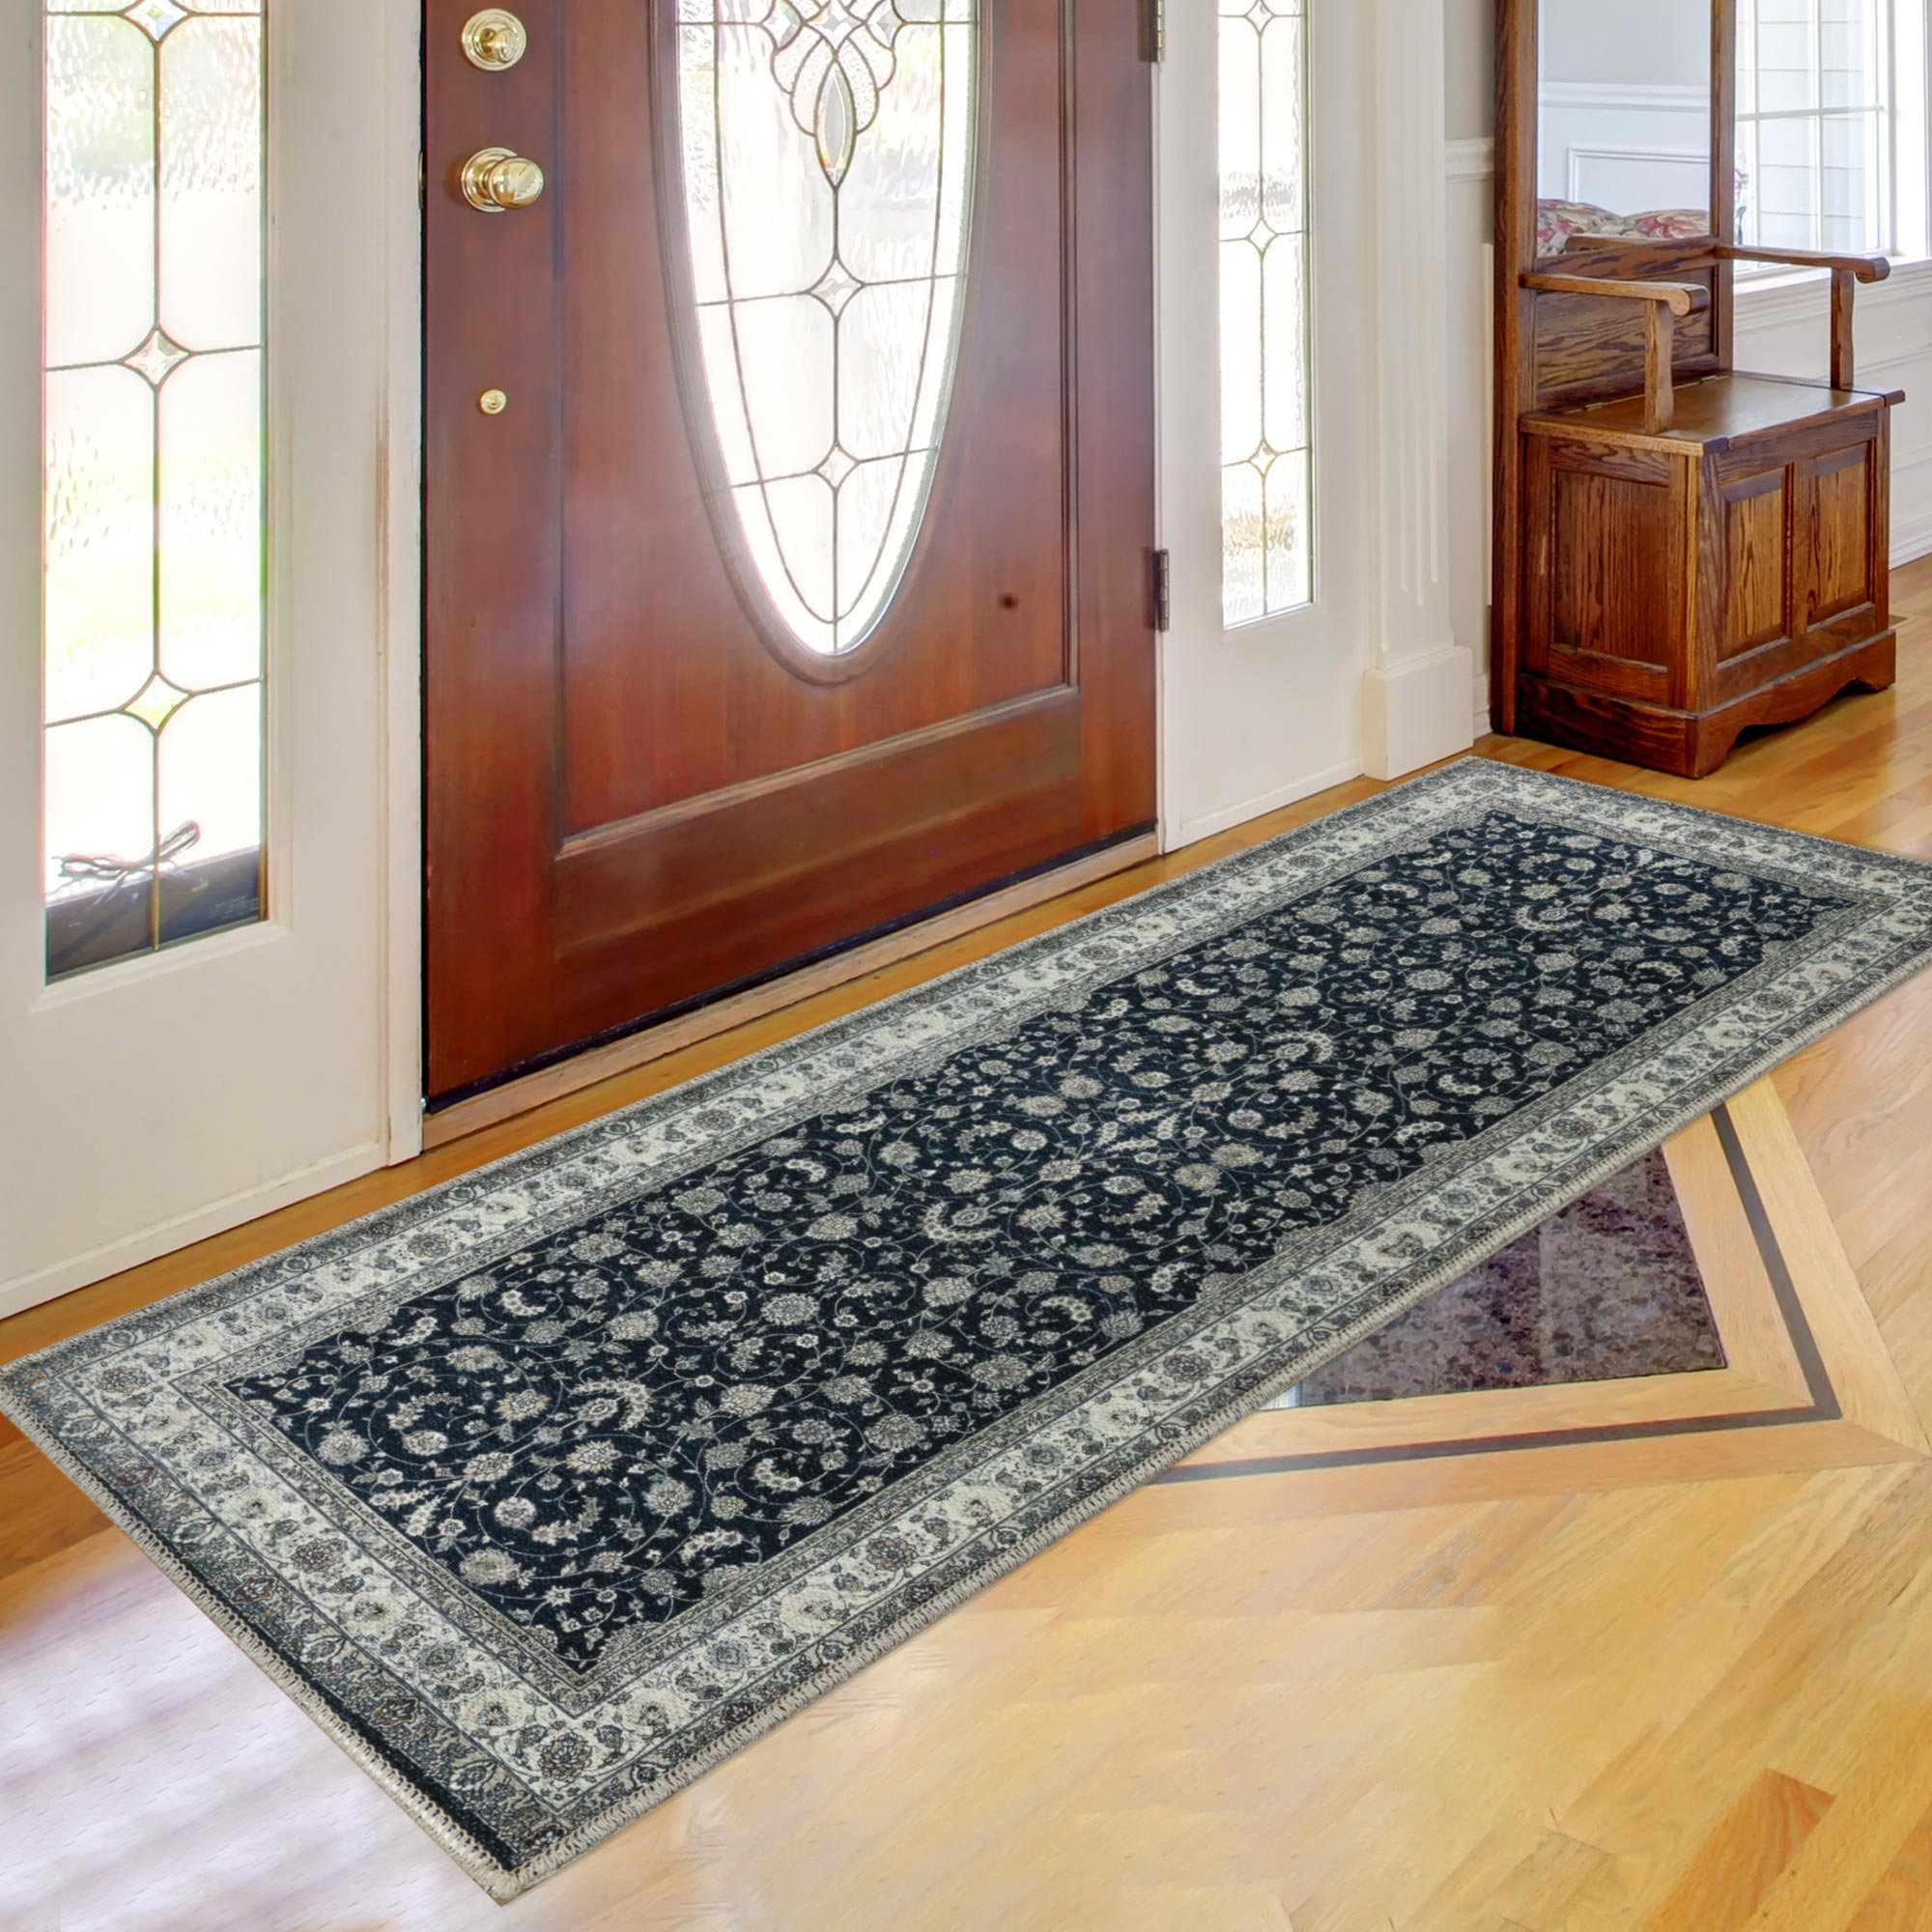 Area Rug for Living Room, 2'x 3' Feet Machine Washable Rug, Rugs for Living  Room Bedroom Traditional Woven Rug Carpet Stain Resistant Dining Home